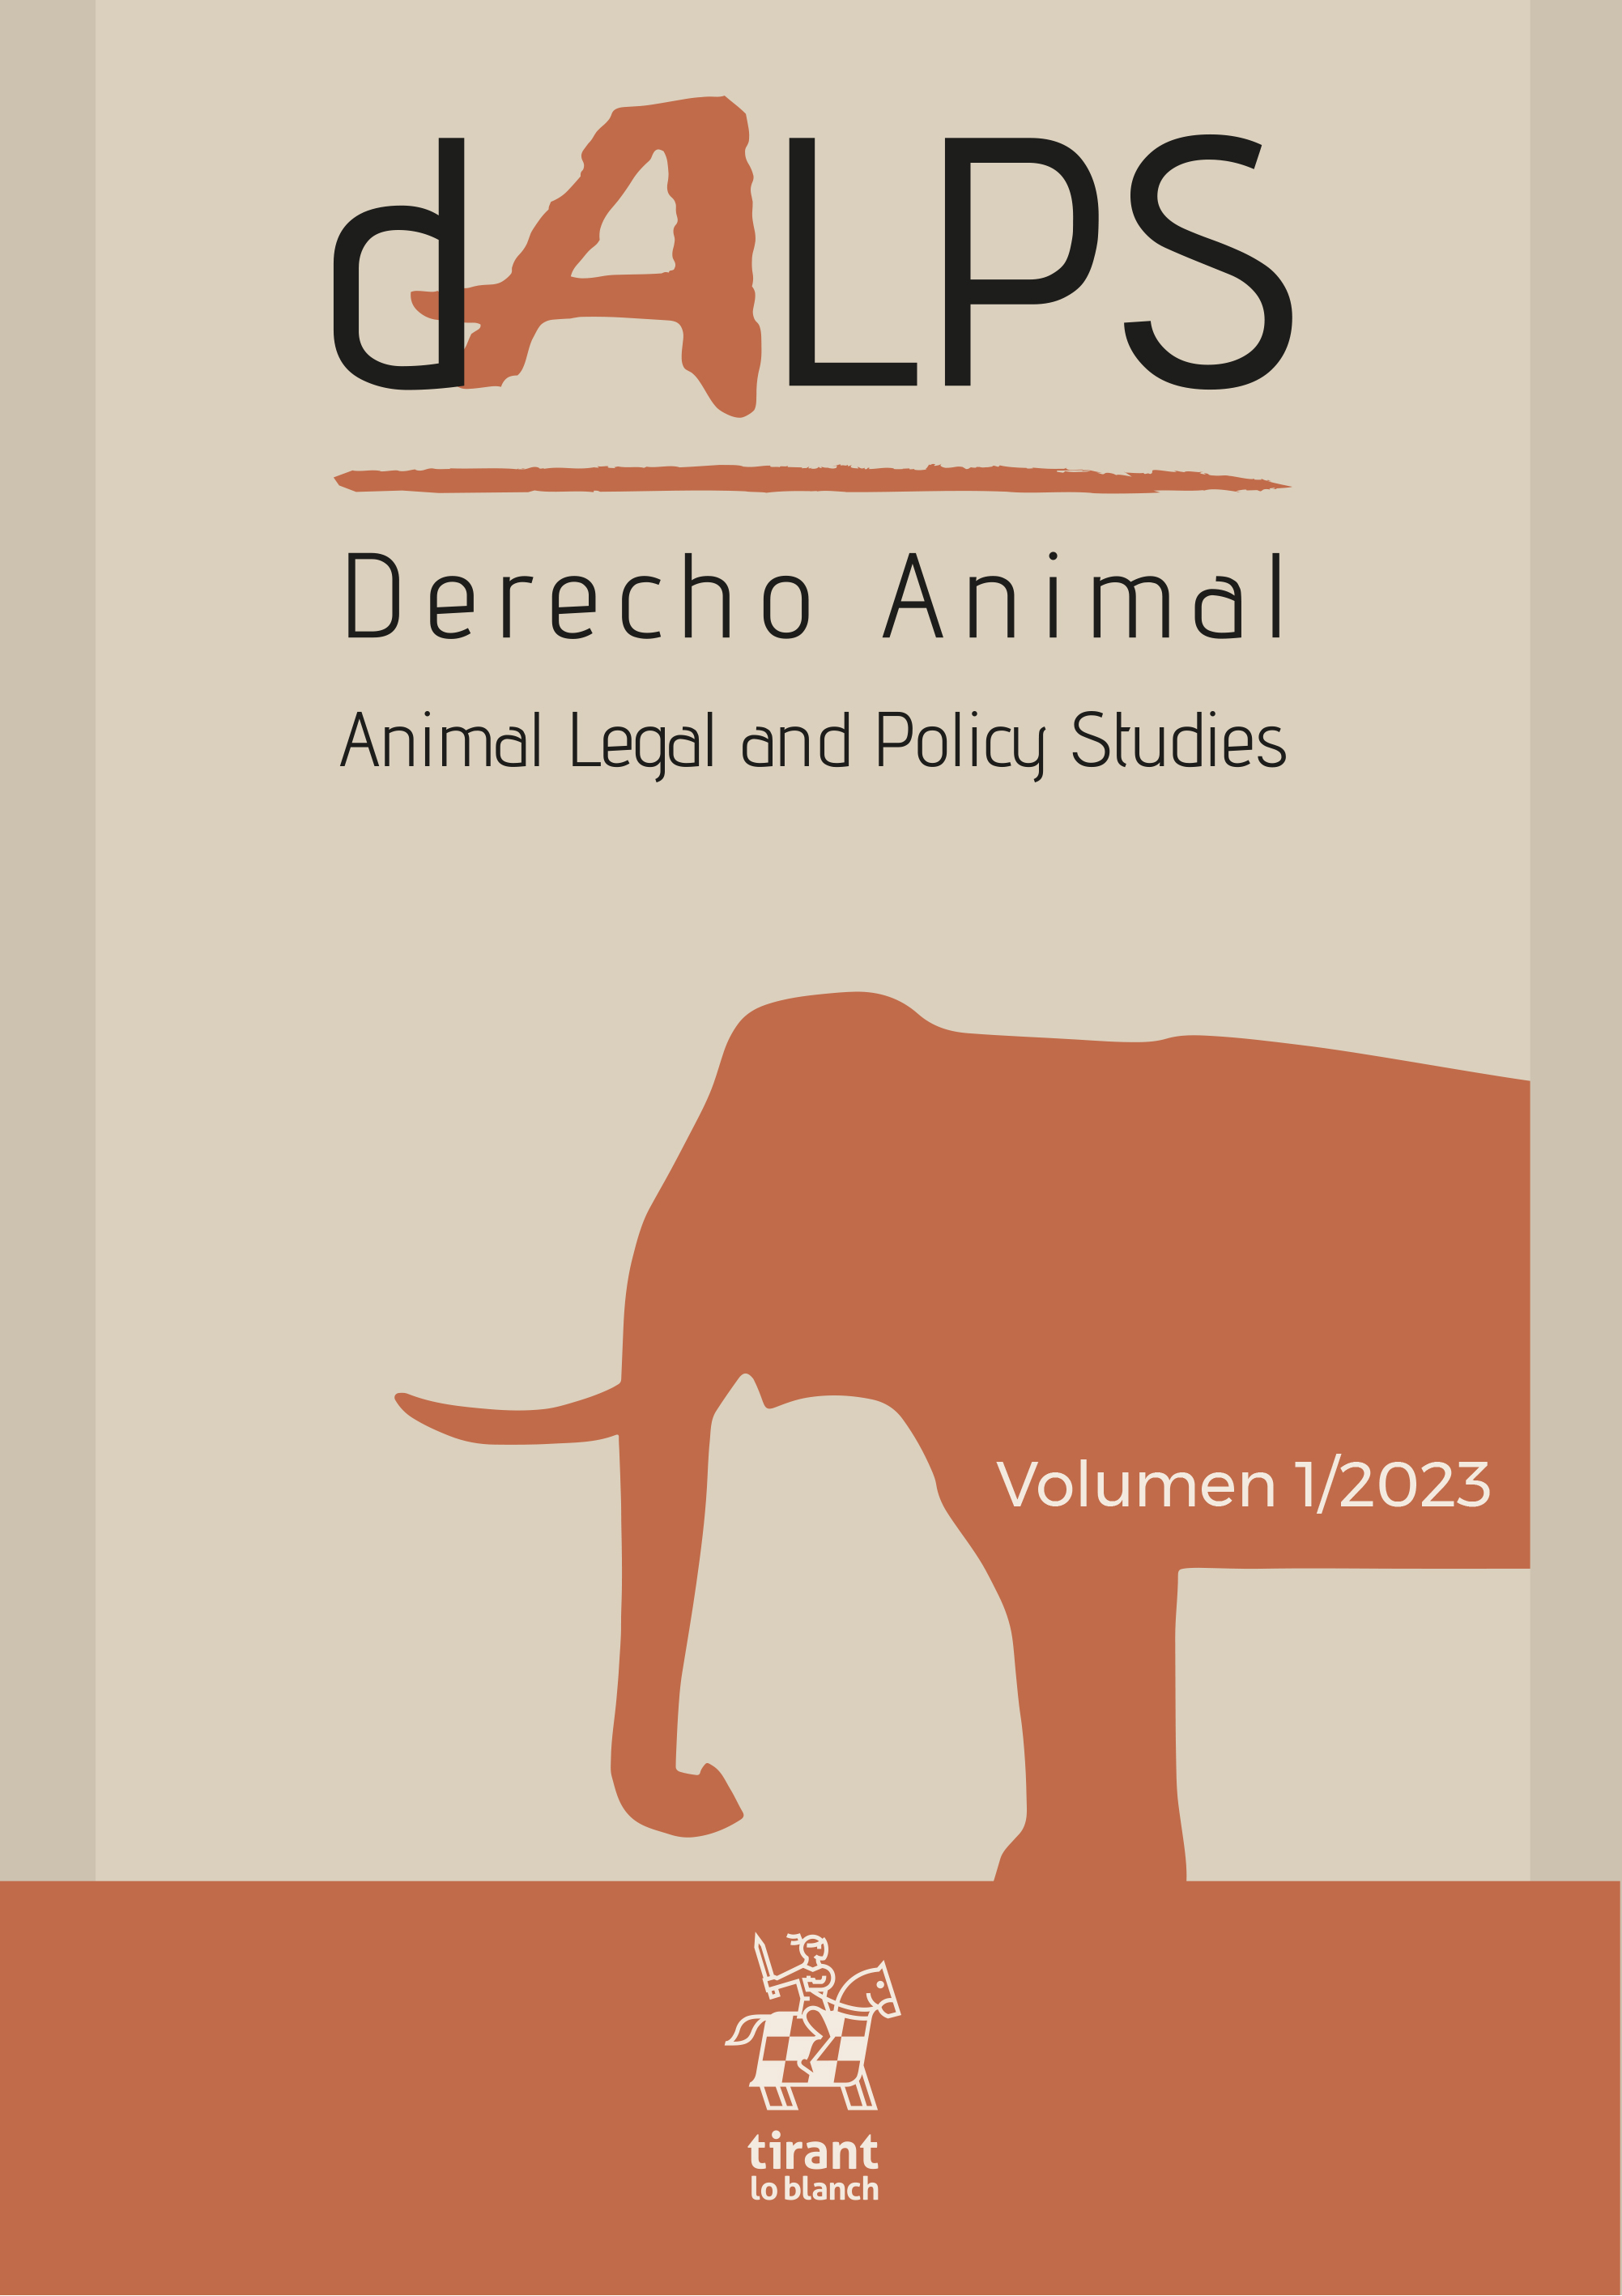 Dalps - Direcho Animal: 'Animal Legal and Policy Studies'